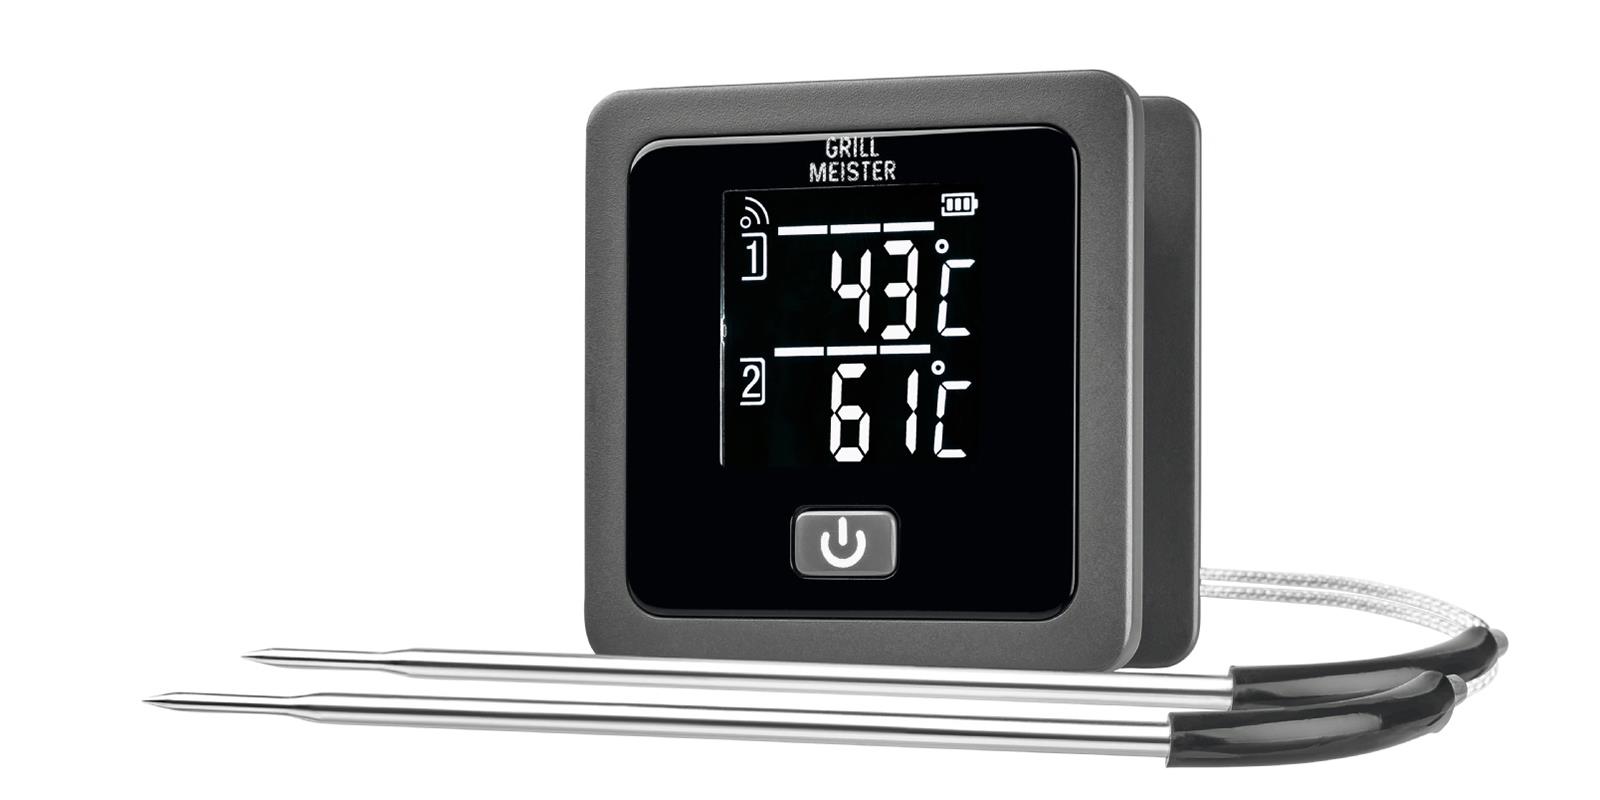 2.4 funk-Grillthermometer GTGT GRILLMEISTER